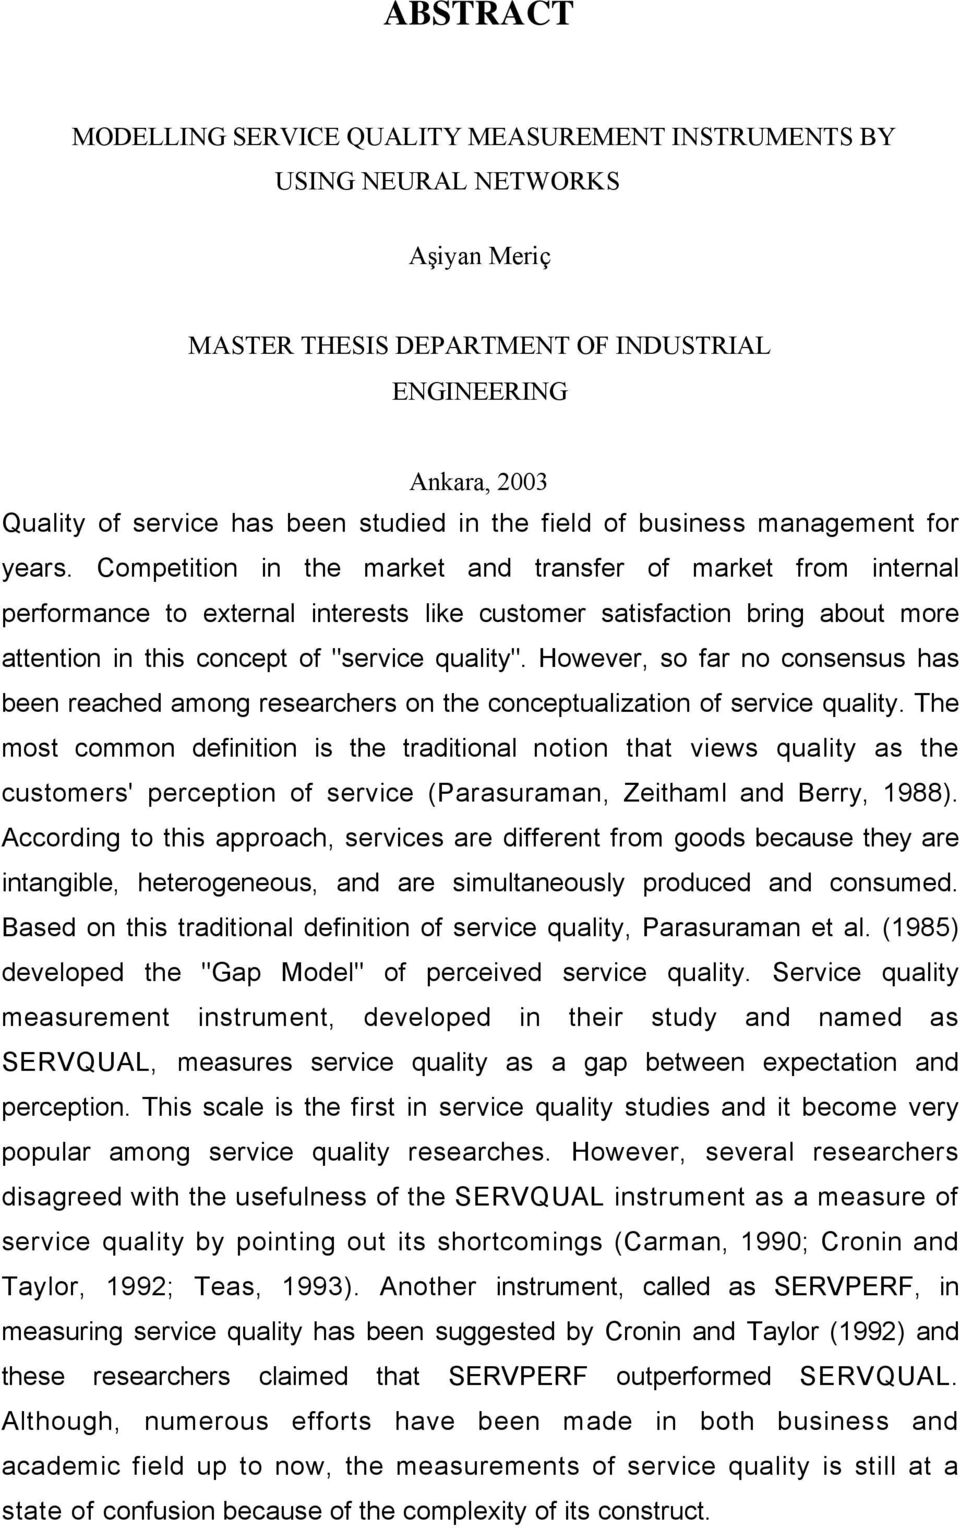 Competition in the market and transfer of market from internal performance to external interests like customer satisfaction bring about more attention in this concept of "service quality".